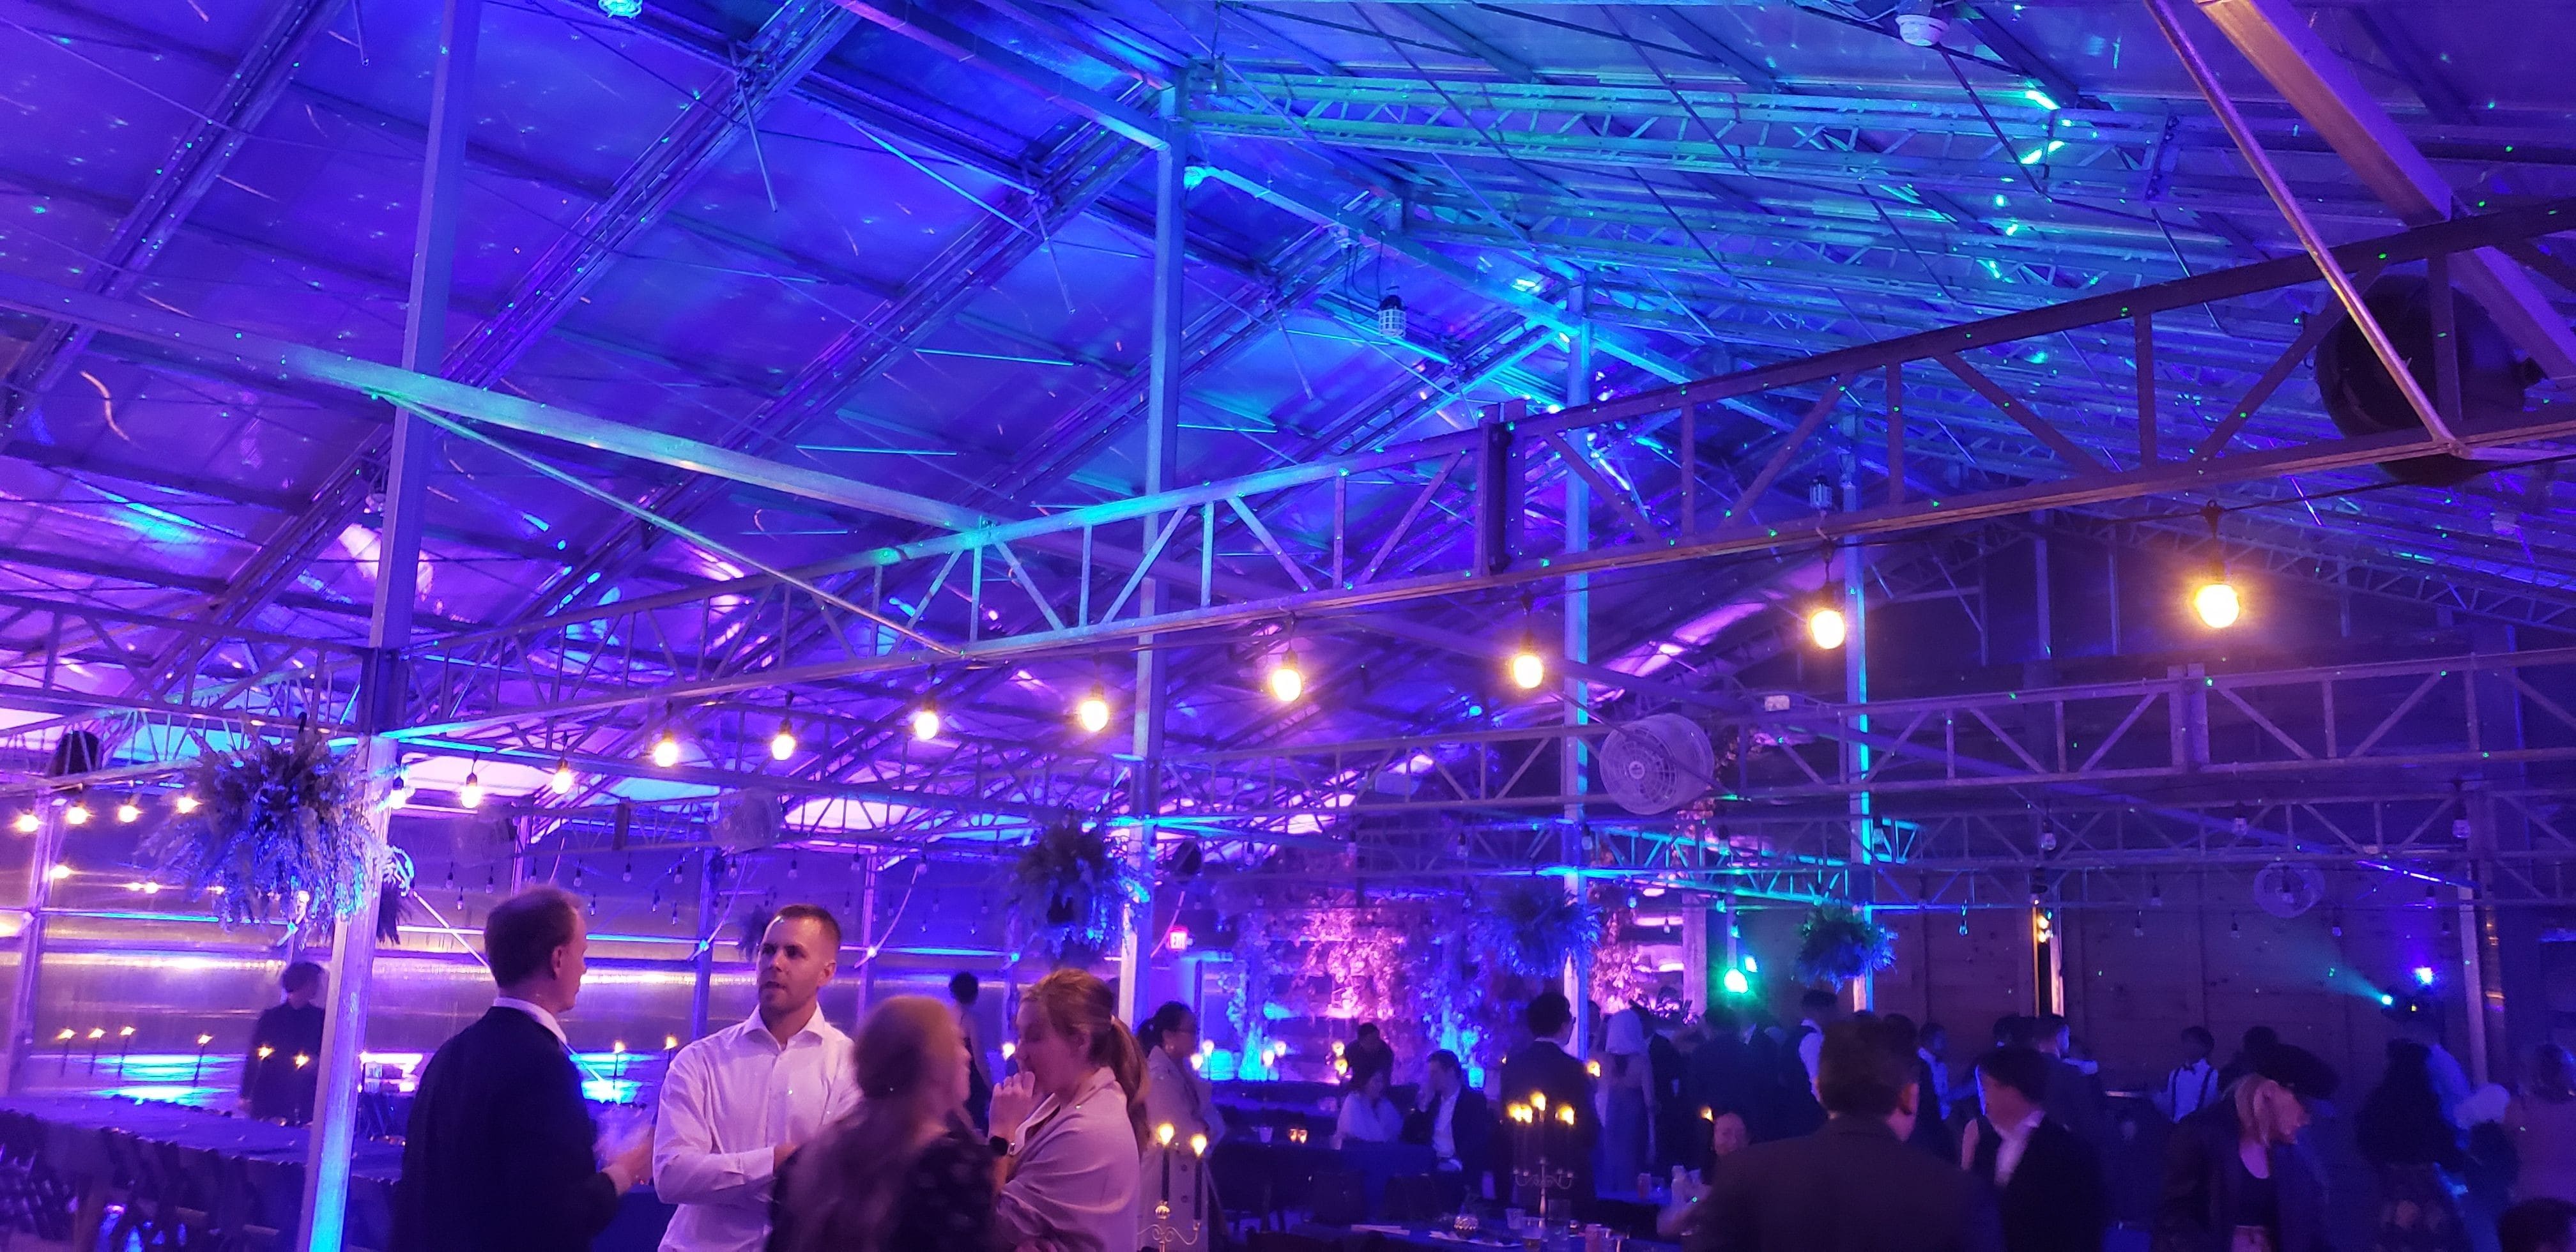 Wedding lighting by Duluth Event Lighting at the Atrium. Up lighting in blue with northern lights on the ceiling.